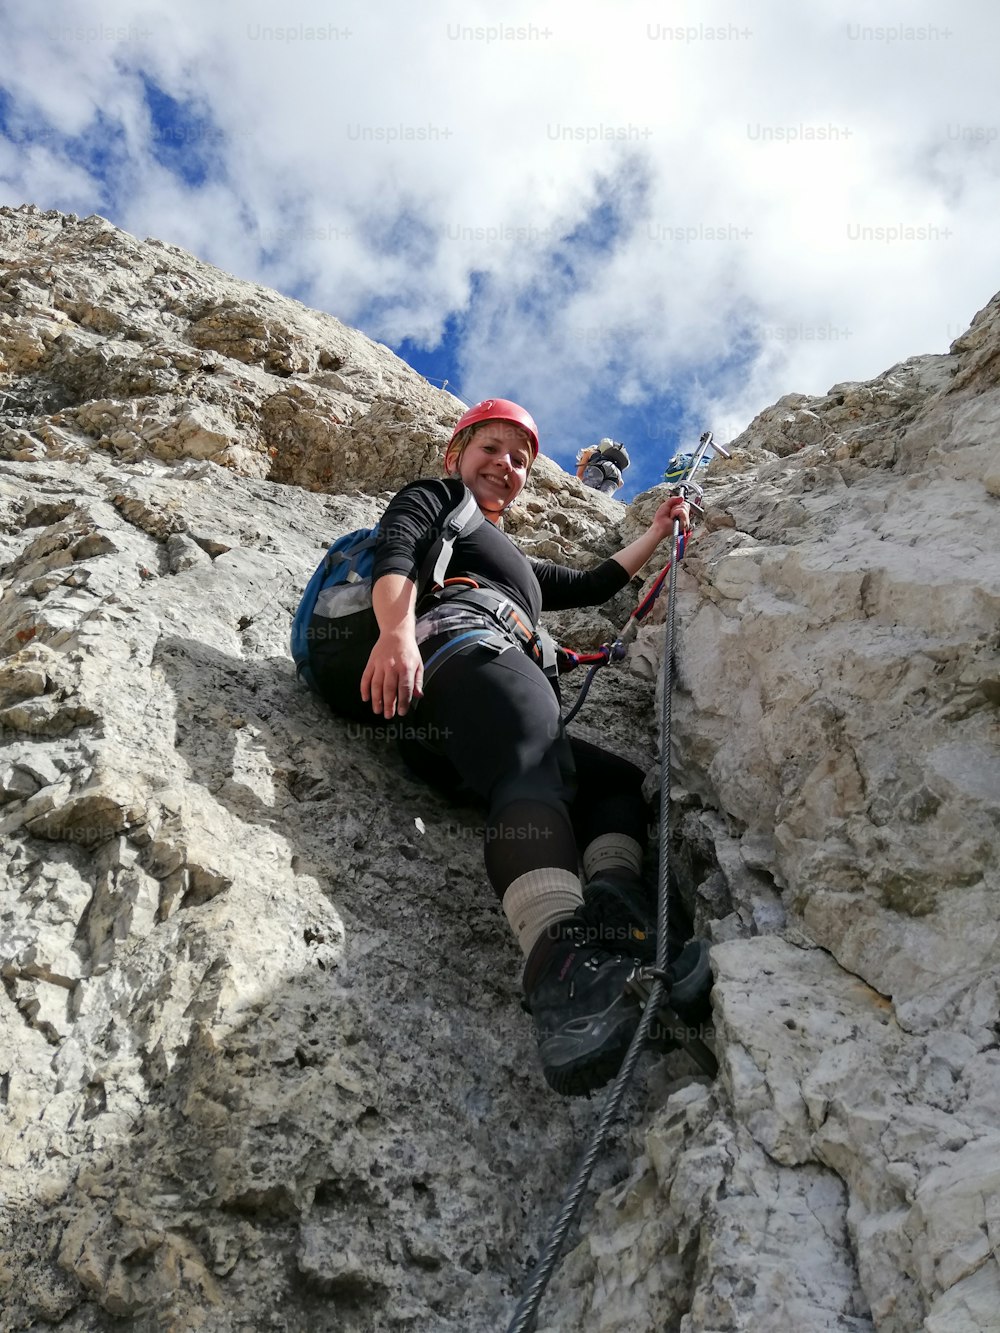 Vertical view of an attractive blonde female climber on a steep Via Ferrata in the Italian Dolomites with a great view behind